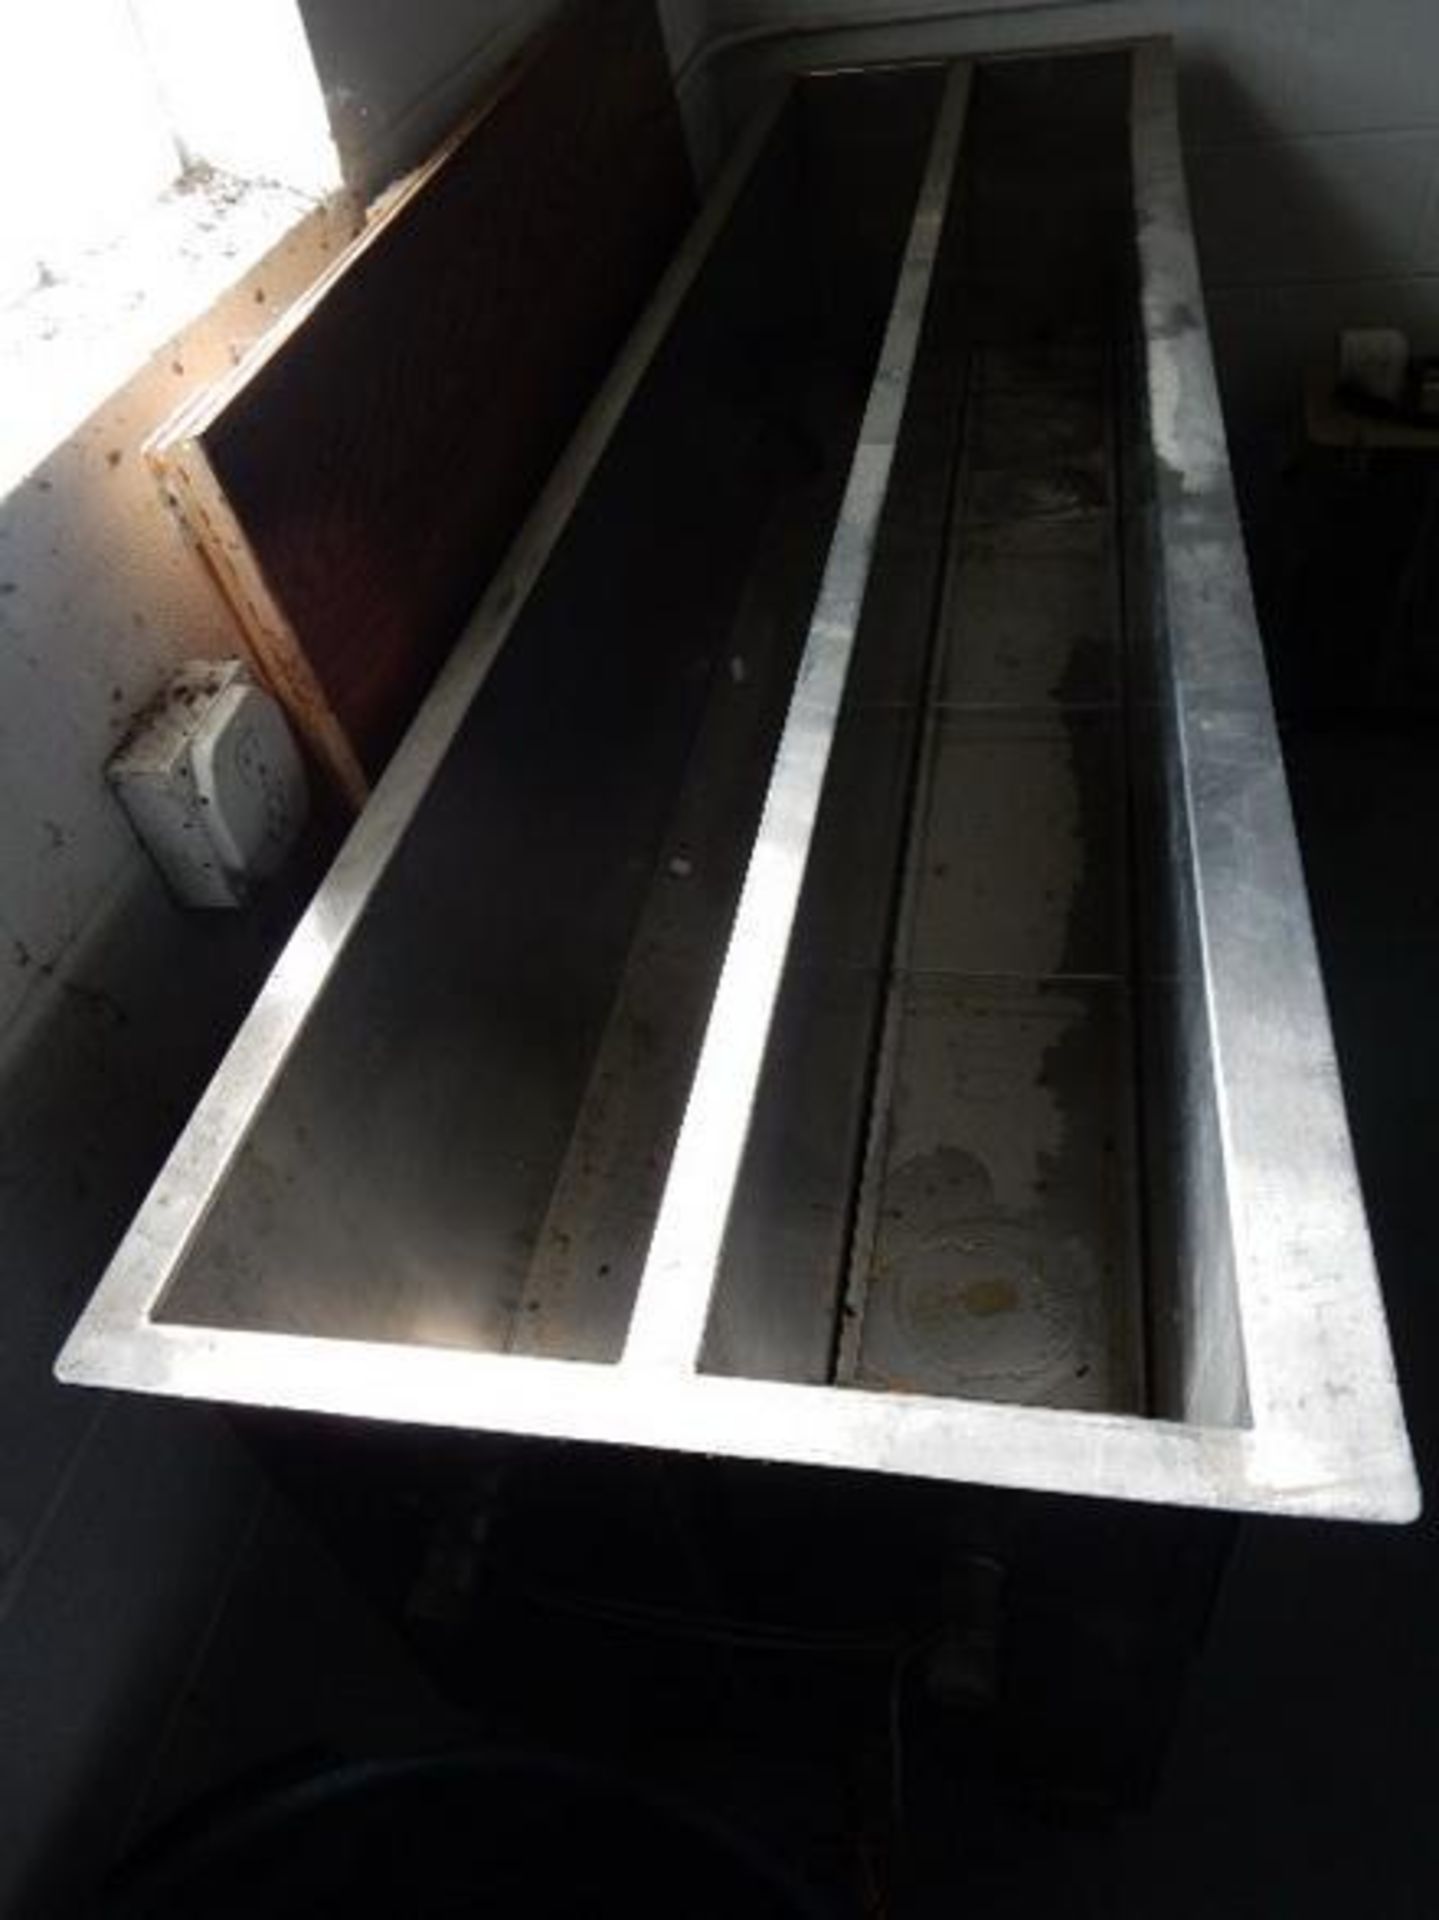 Stainless Steel Cleaner Soak Tank Dimension: 21 1/2 x 78" x 40". - Image 2 of 3